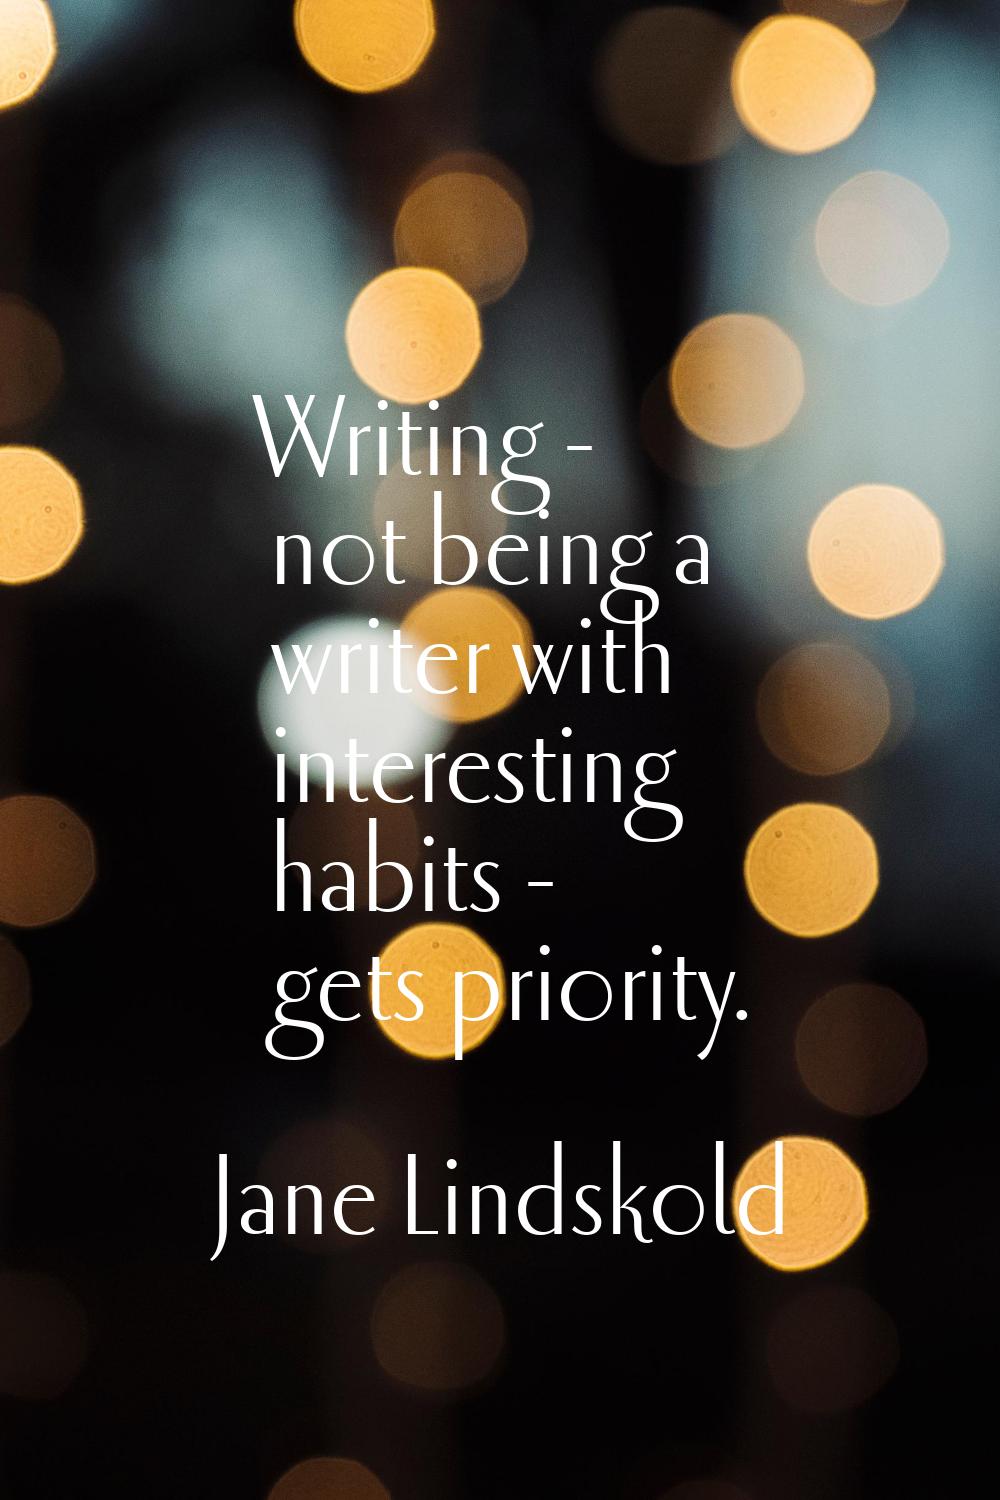 Writing - not being a writer with interesting habits - gets priority.